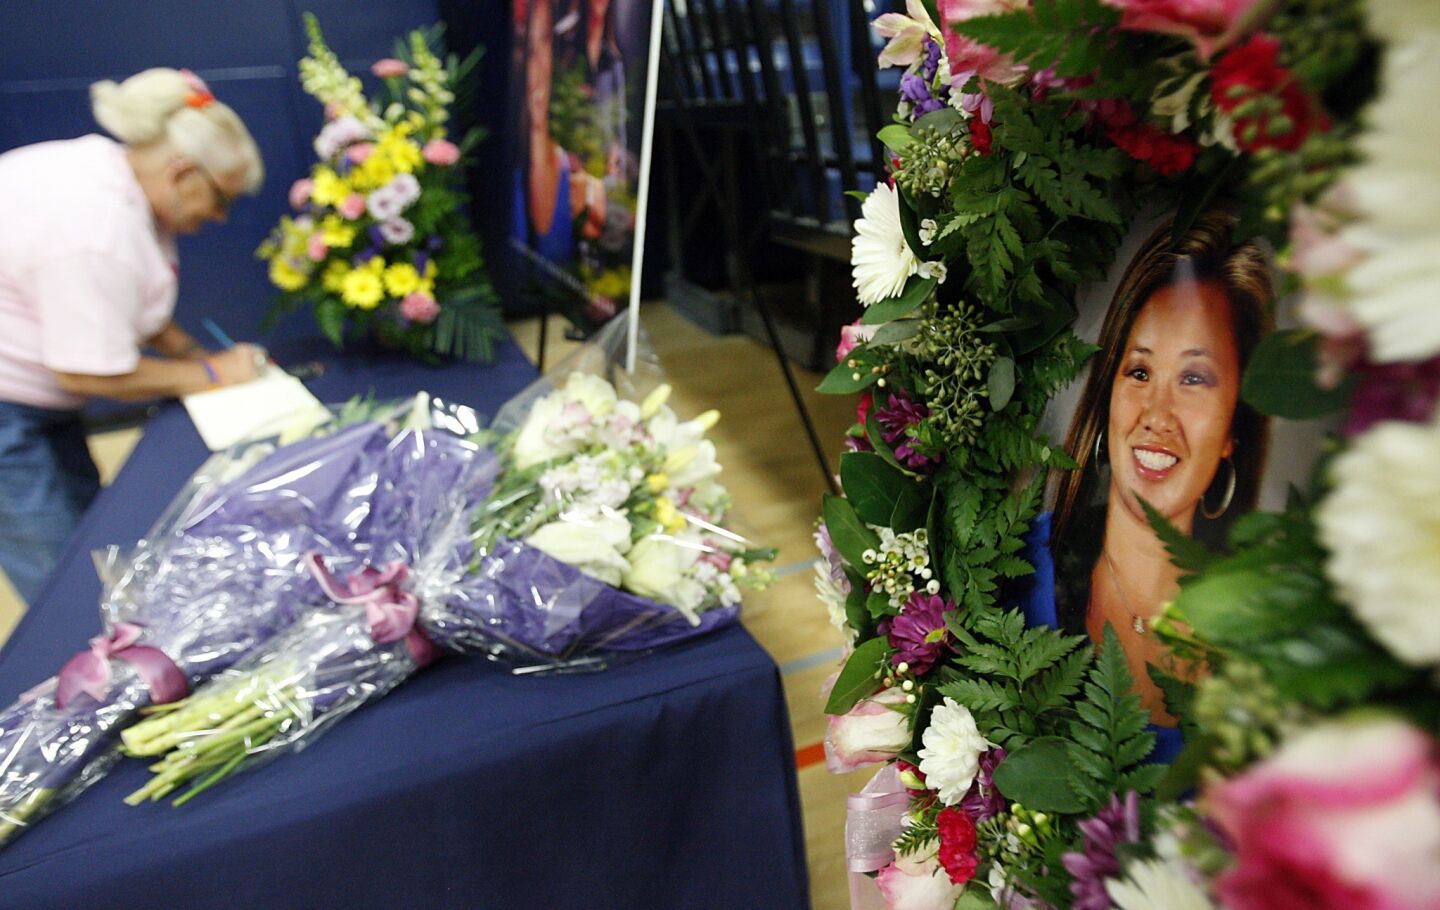 A mourner signs a condolence book for slain Cal State Fullerton assistant women's basketball coach Monica Quan, pictured at right, before a home game against UC Irvine on Saturday. Quan and her fiance are believed to be the first victims of a fatal shooting rampage by fired LAPD officer Christopher Jordan Dorner.